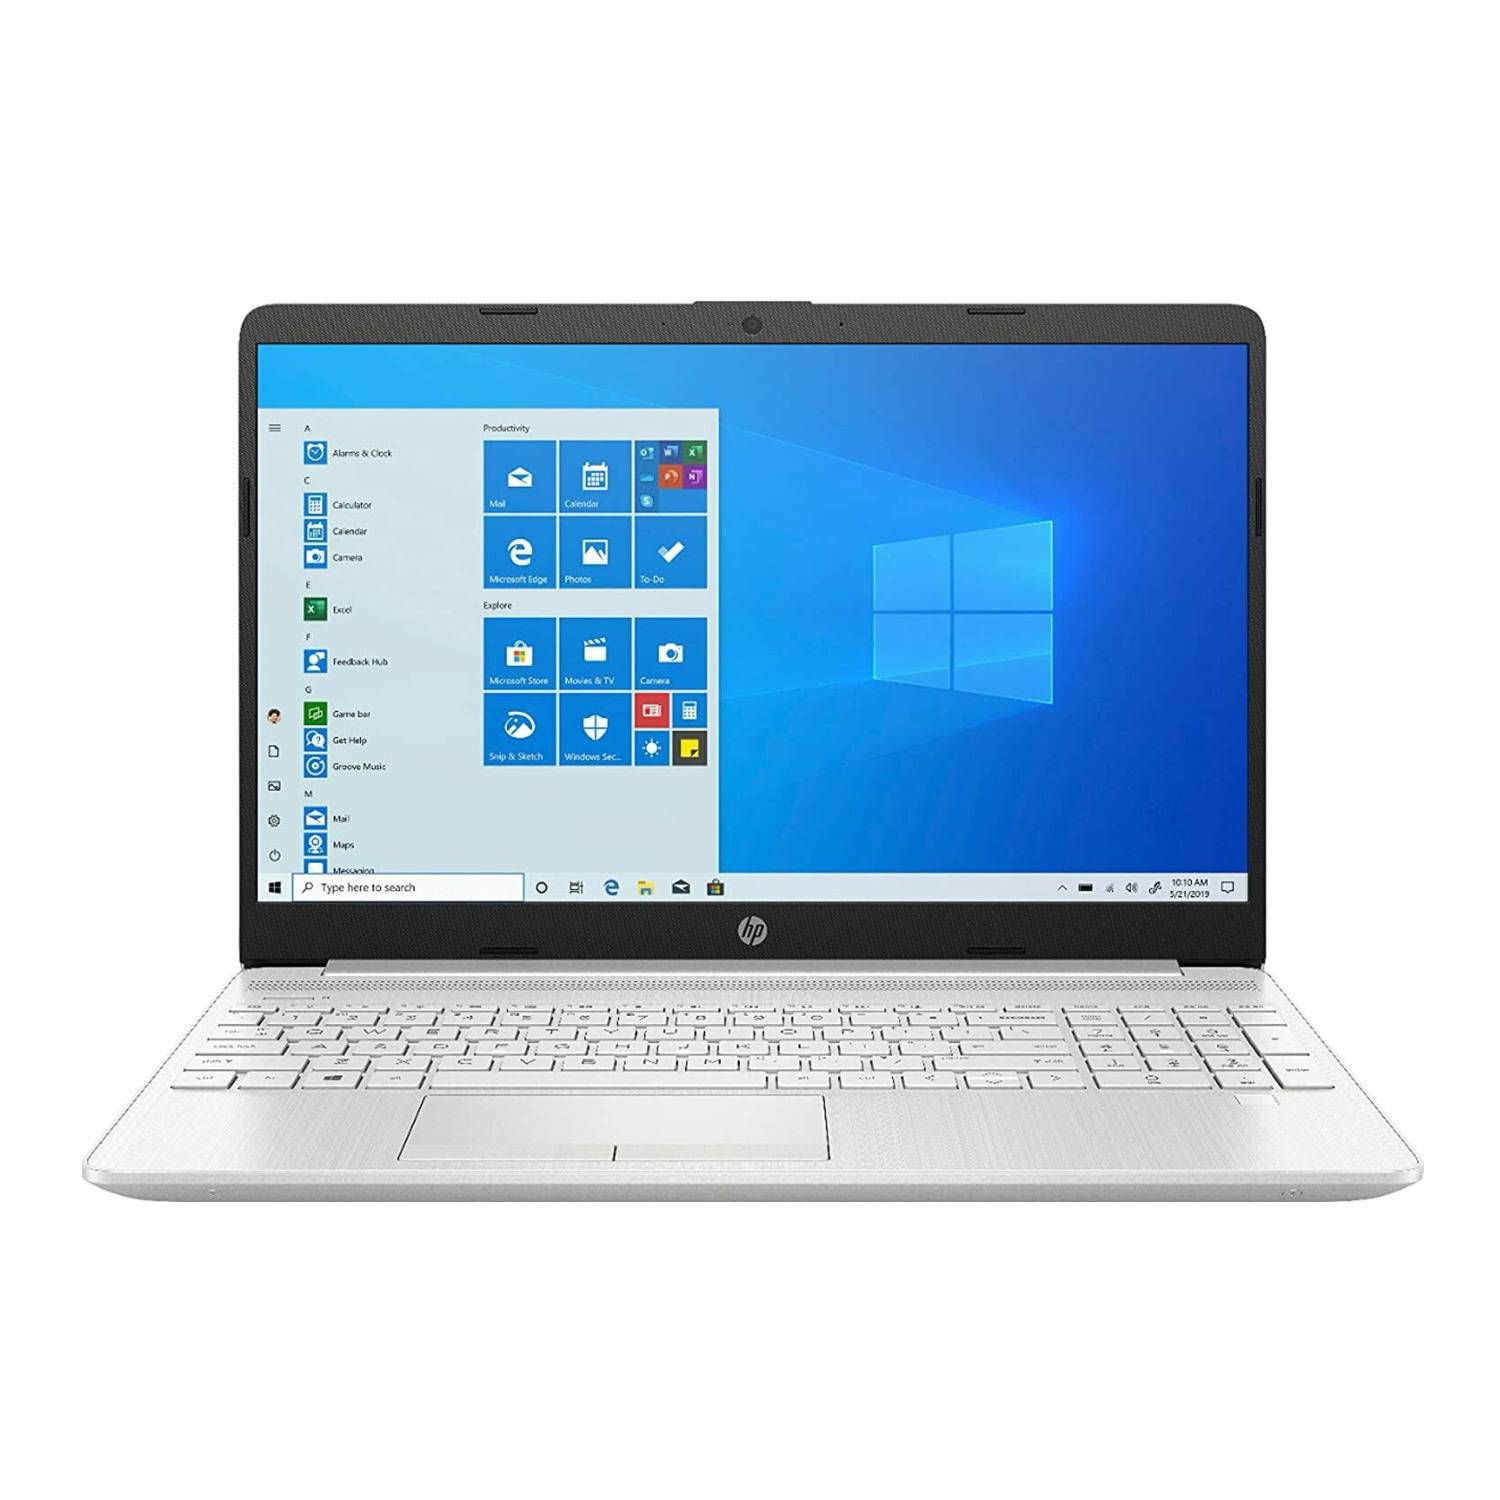 HP 15-DW Laptop Intel Core i3-1115G4 8GB 256GB SSD 15.6-Inch FHD WLED Win 10 (Natural Silver)